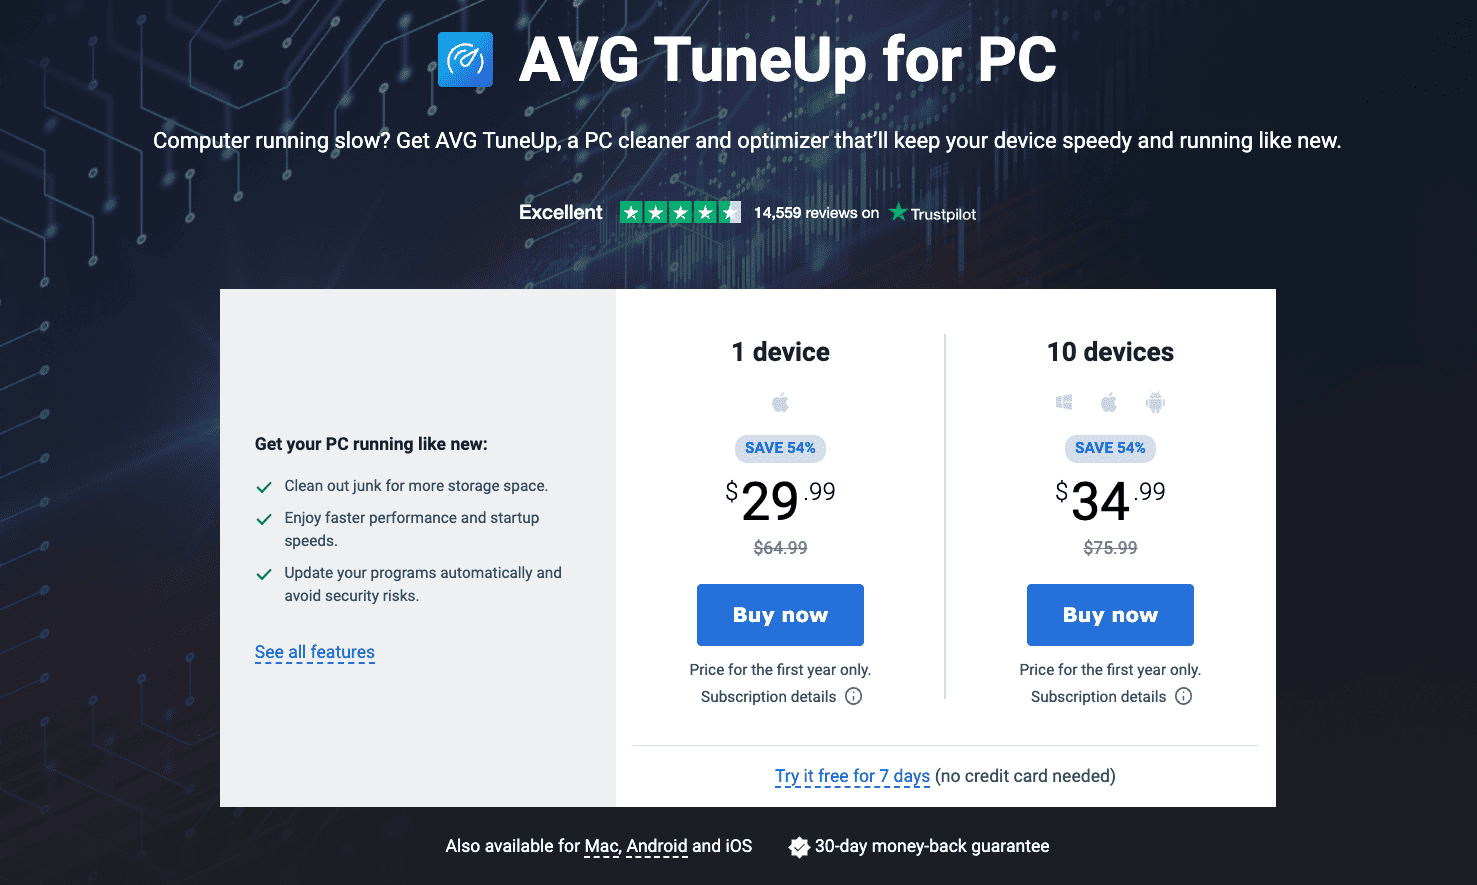 TuneUp Pricing